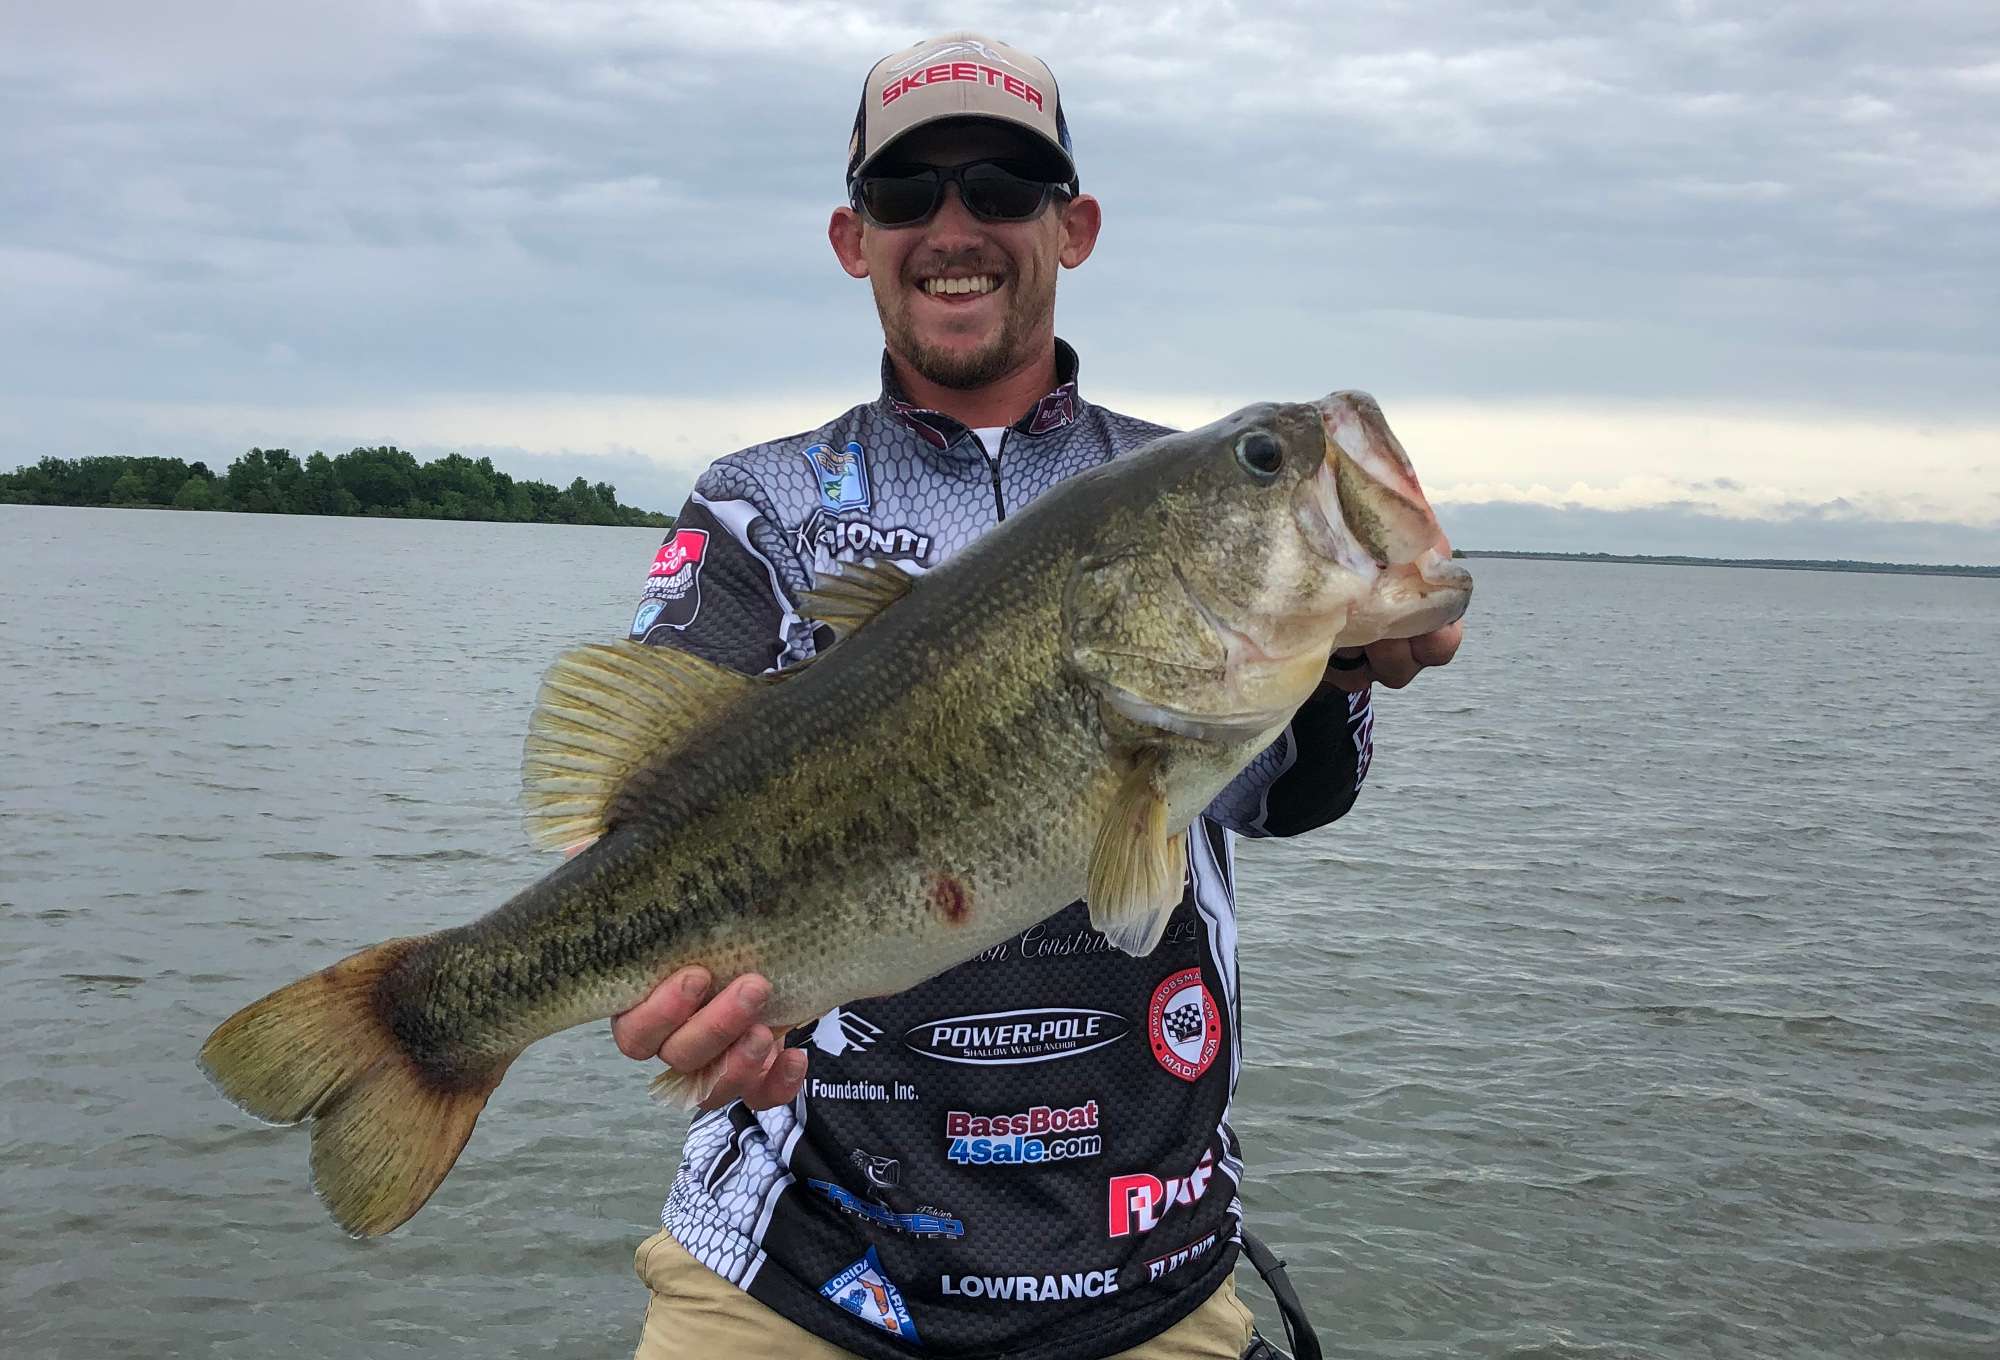 Kyle Monti with a chunk!